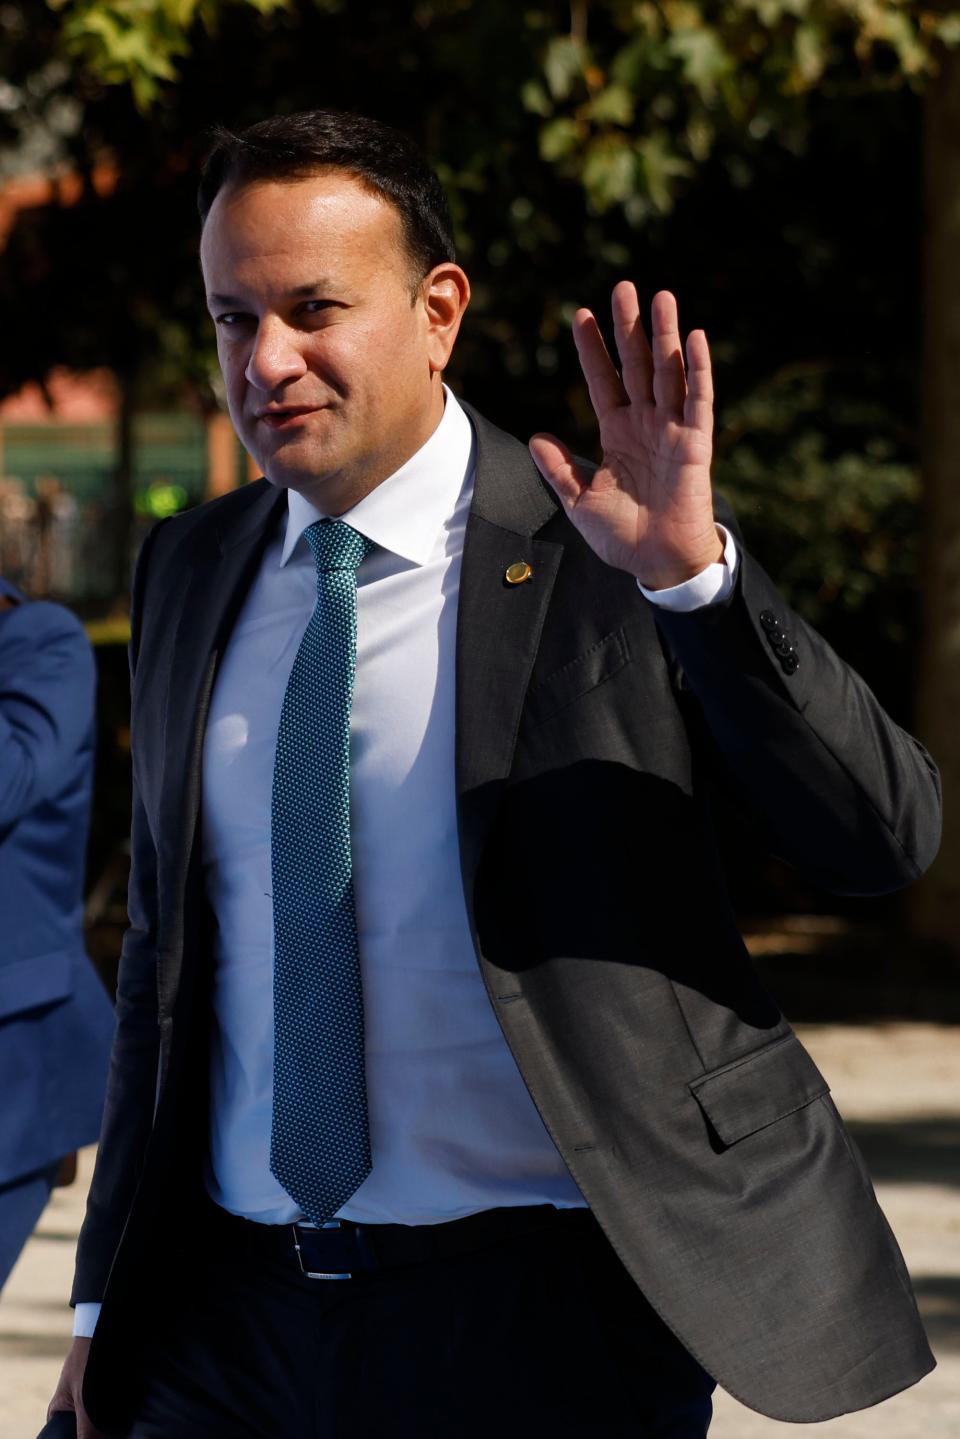 Varadkar said claims of a row were “exaggerated” but the wider issue was a “serious” one (Getty Images)